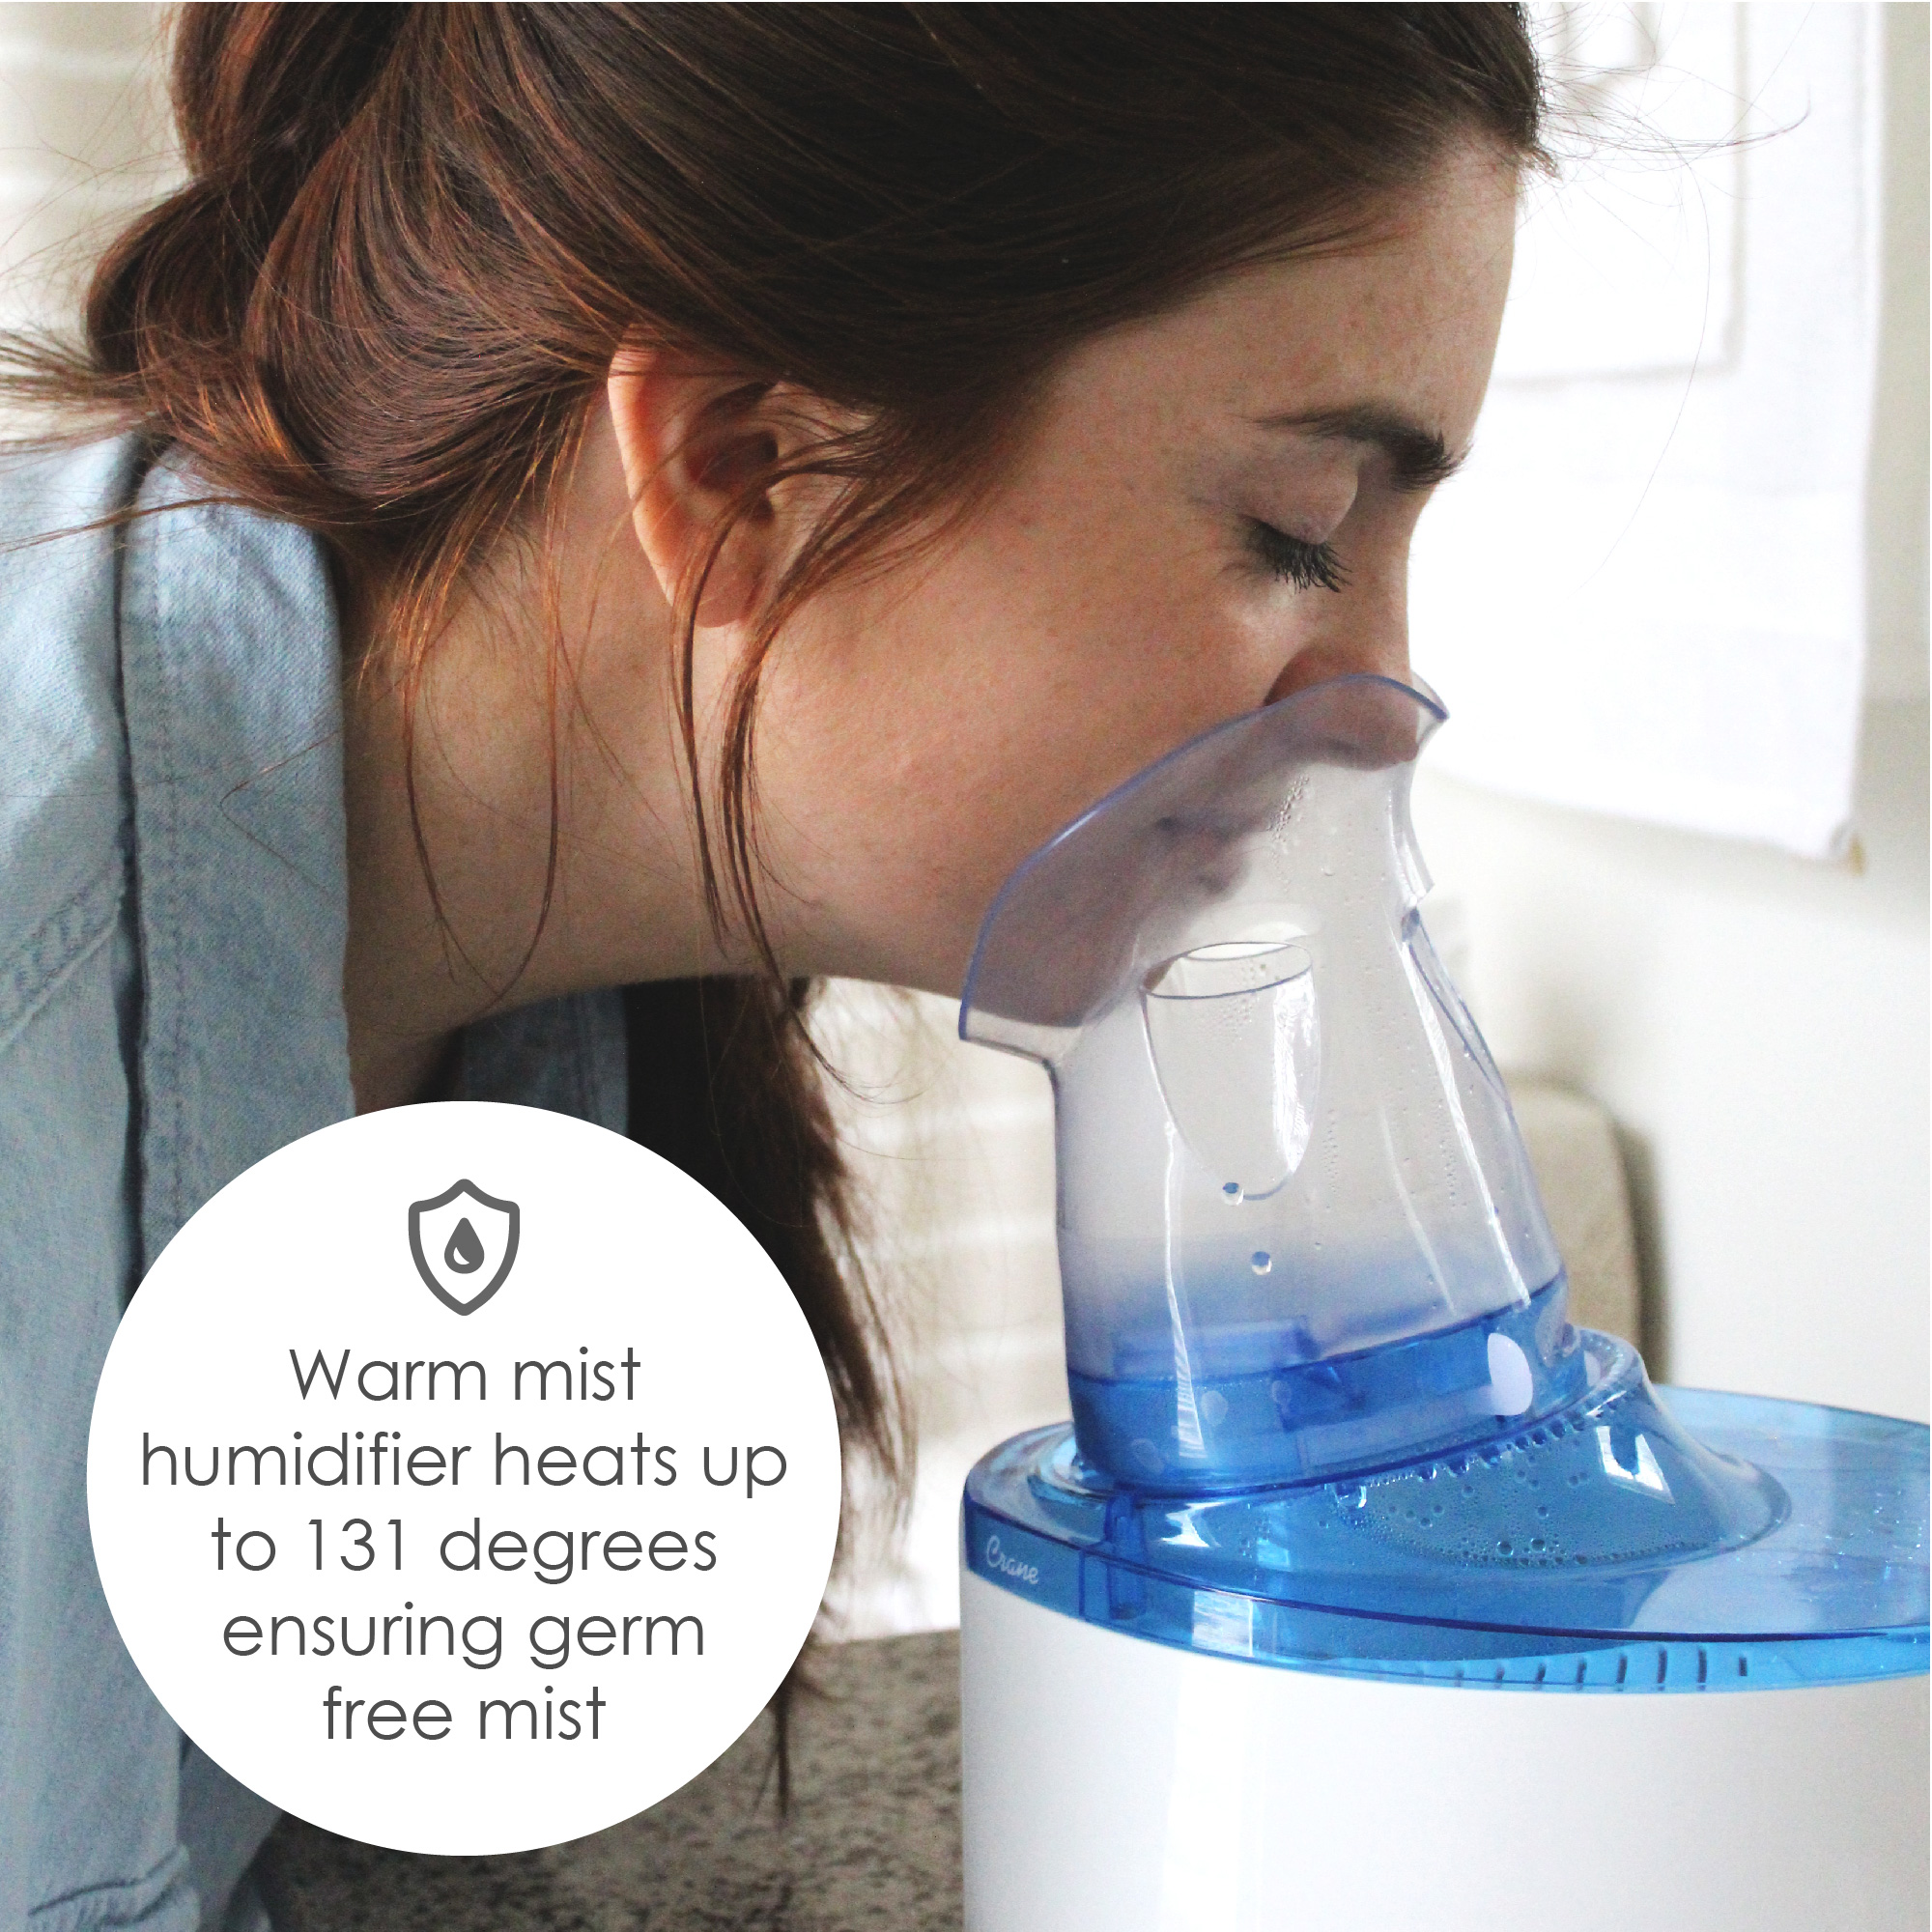 Have anybody ever tried using a steamer for maintaining humidity